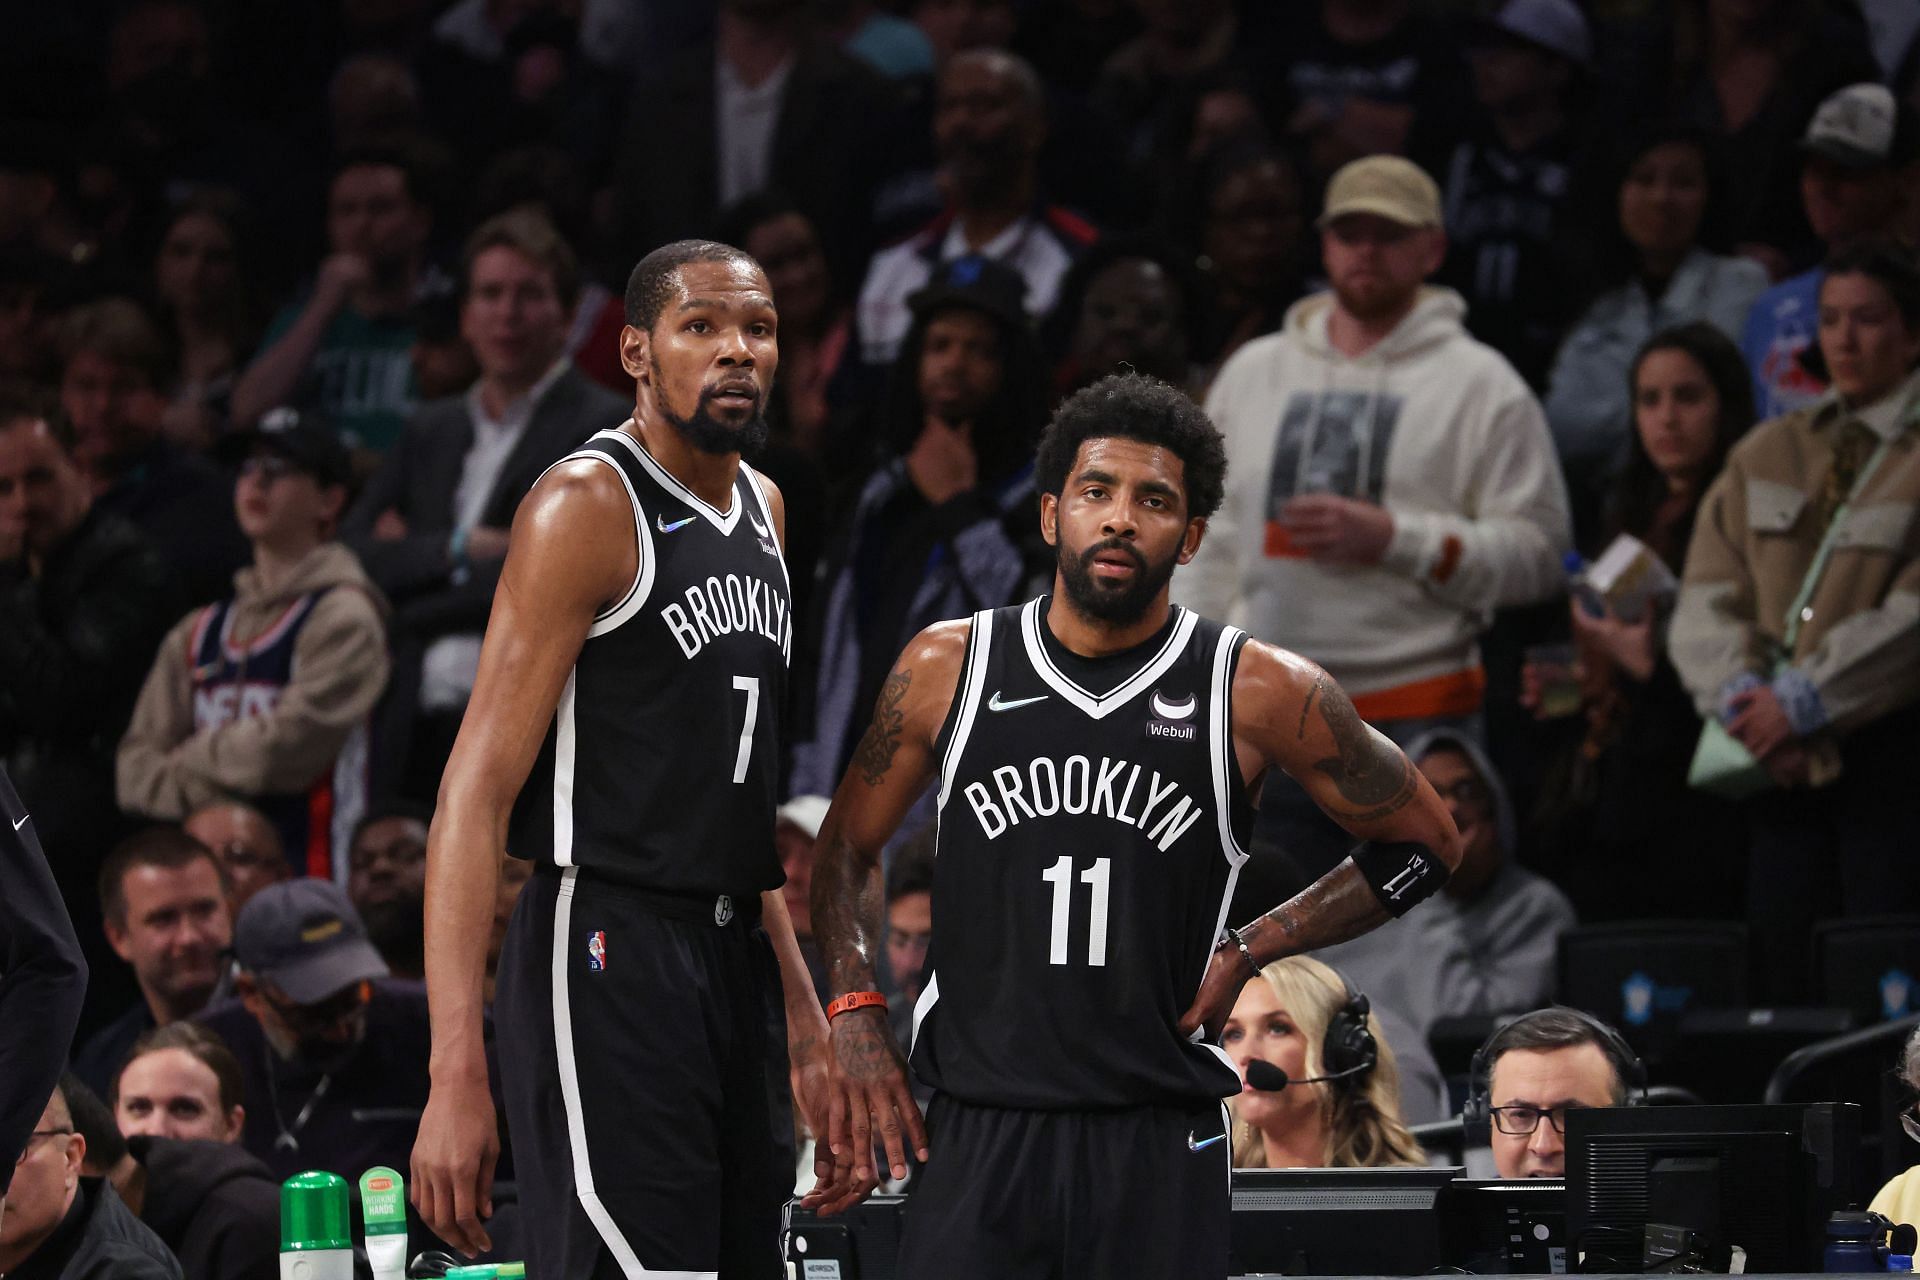 Kevin Durant and Kyrie Irving of the Brooklyn Nets in the 2022 NBA Playoffs.